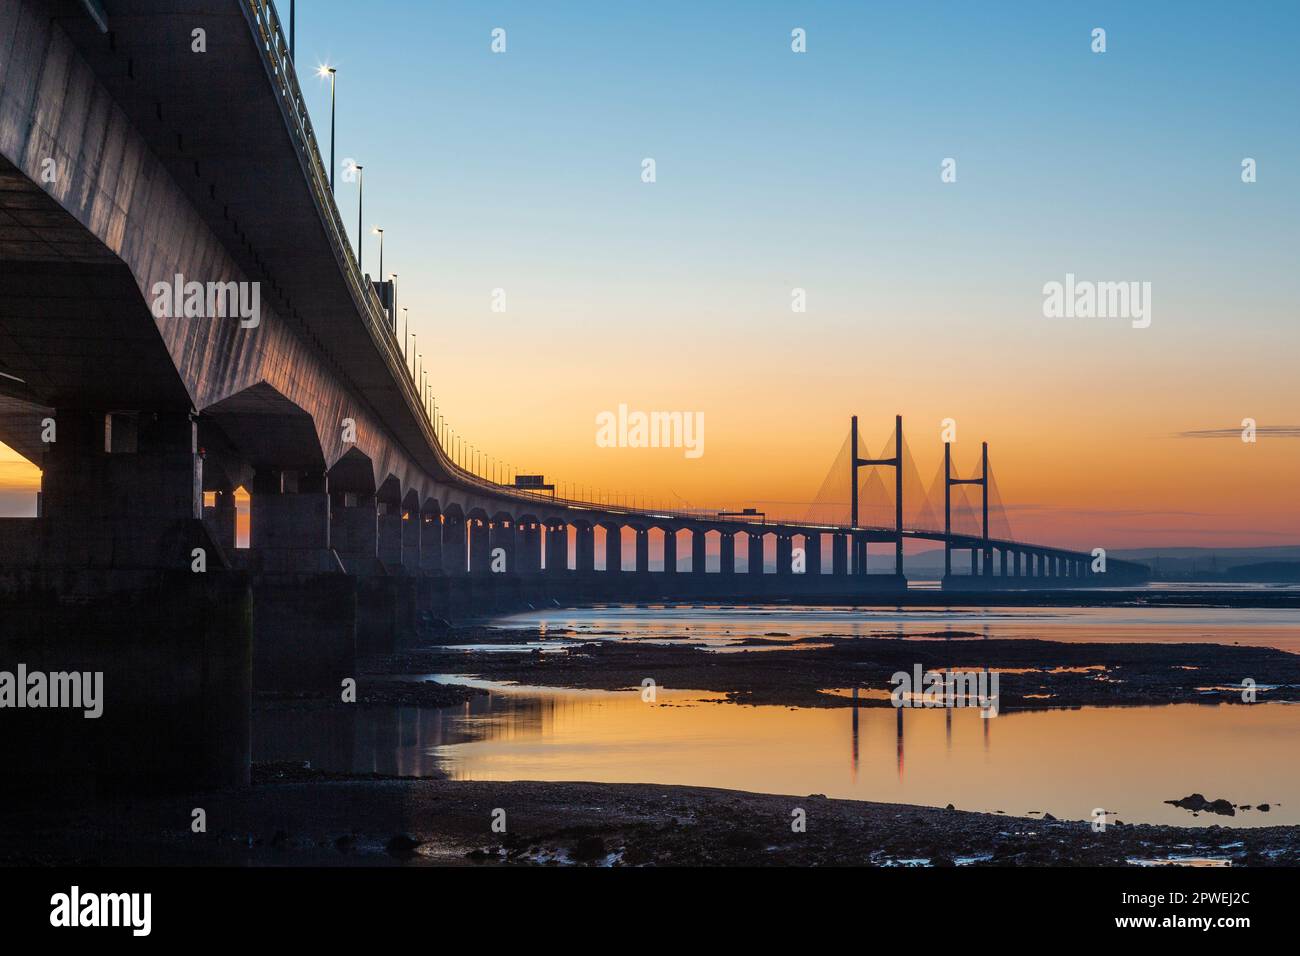 Prince of Wales (M4) bridge over the Severn Estuary from Severn Beach, South Gloucestershire, UK. Opened 1996 and linking England to South Wales. Stock Photo